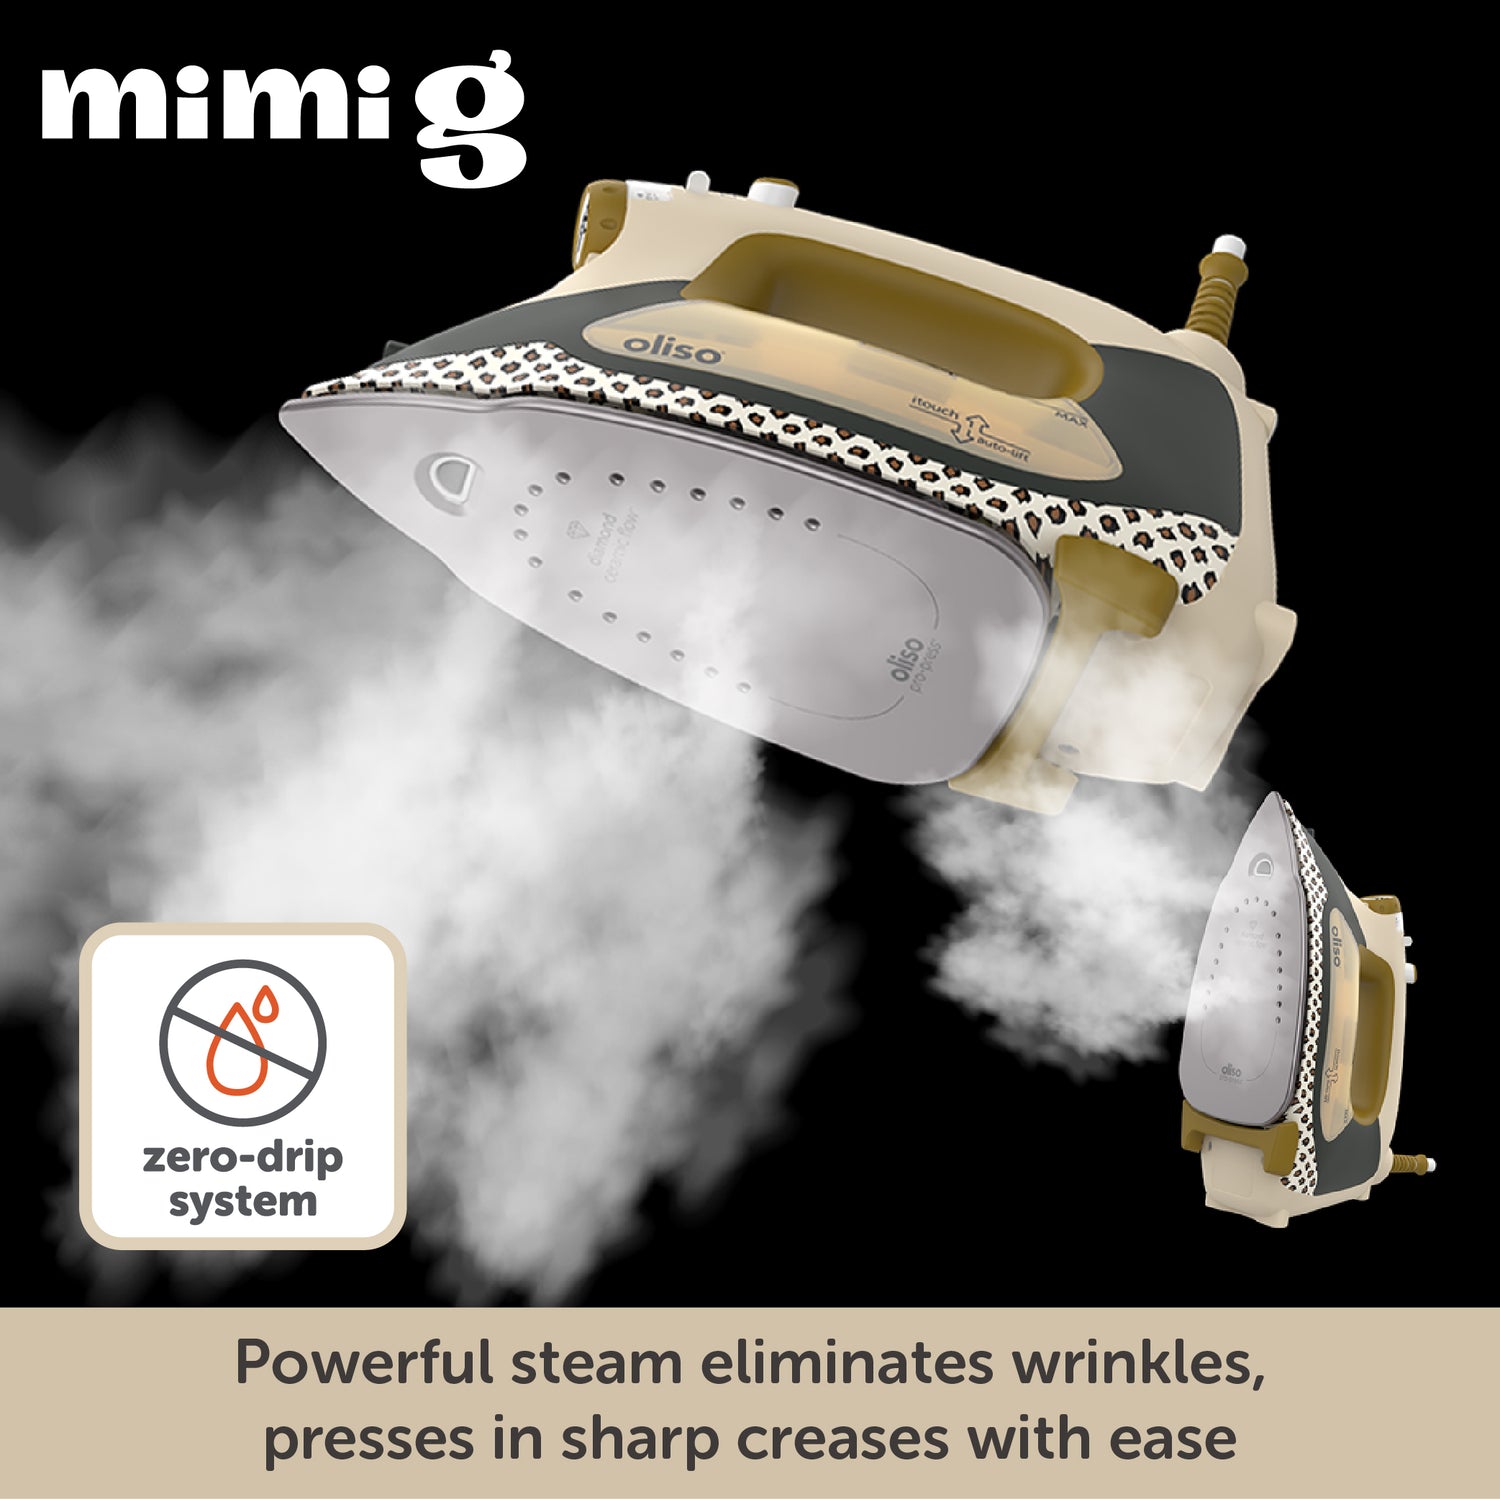 Demonstration of the powerful vertical and horizontal steam produced by the Mimi G iron. Ideal for eliminating wrinkles and pressing in sharp creases and pleats.